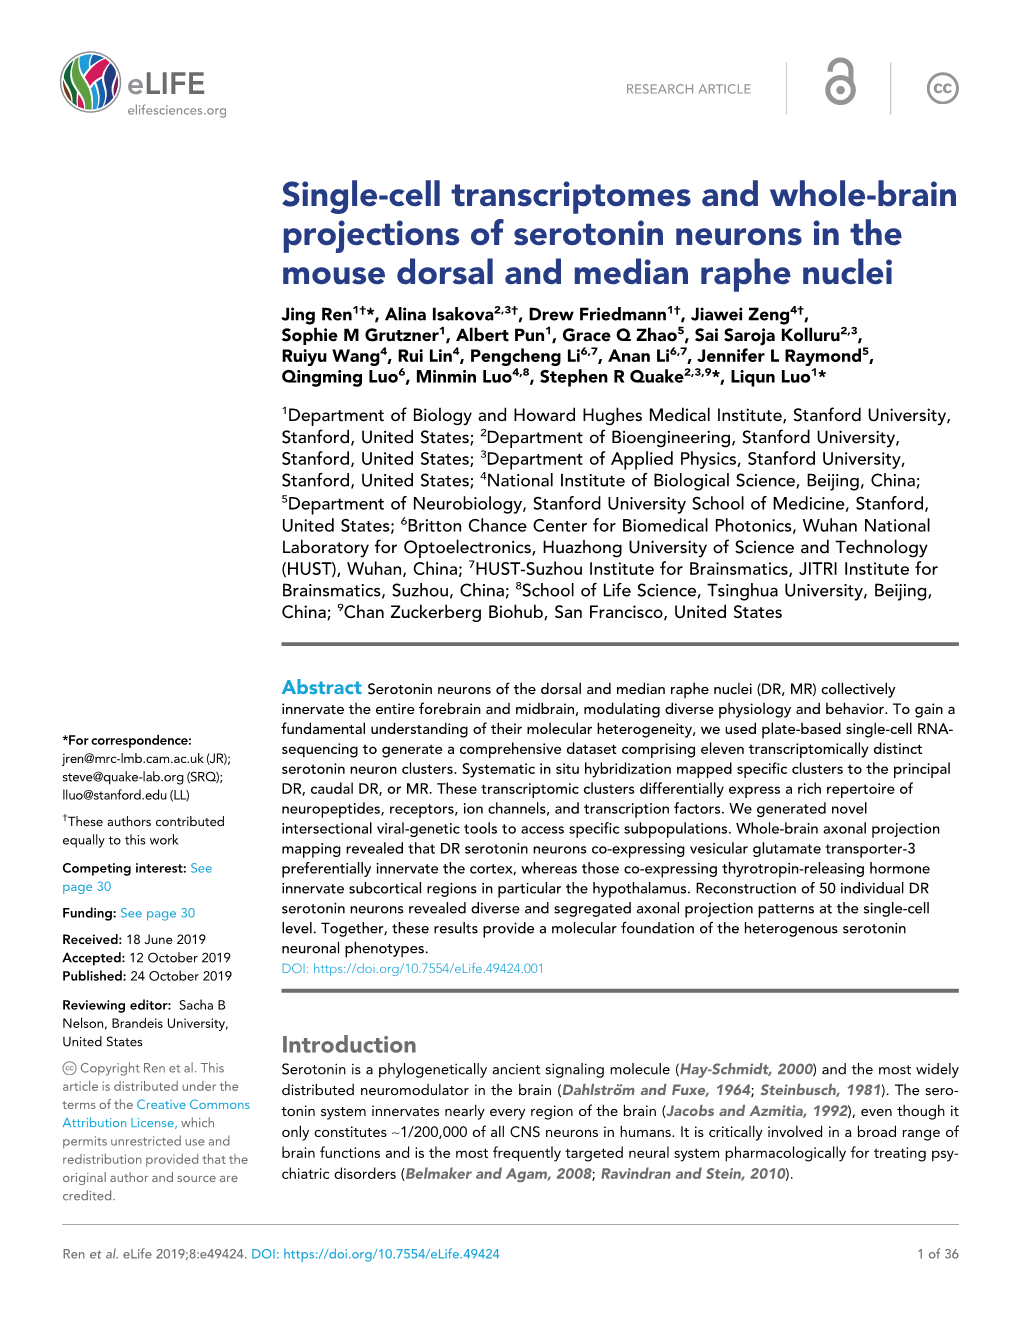 Single-Cell Transcriptomes and Whole-Brain Projections of Serotonin